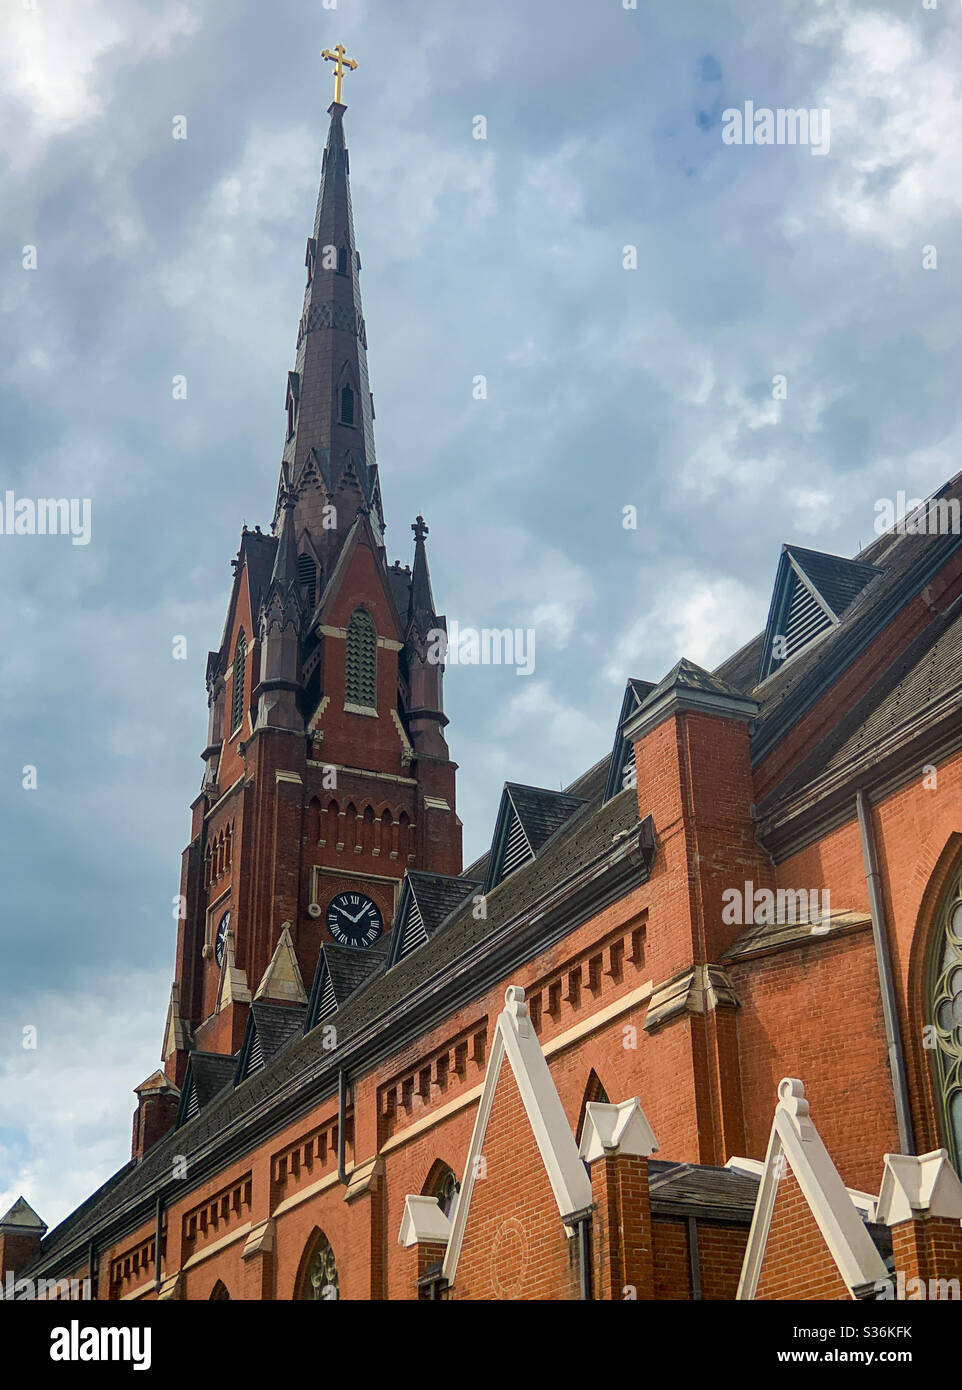 DUBUQUE, IOWA, May 26, 2020--Landscape photo of the steeple of an old red brick historic church with symmetrical windows and peaks on a sunny spring day. Stock Photo